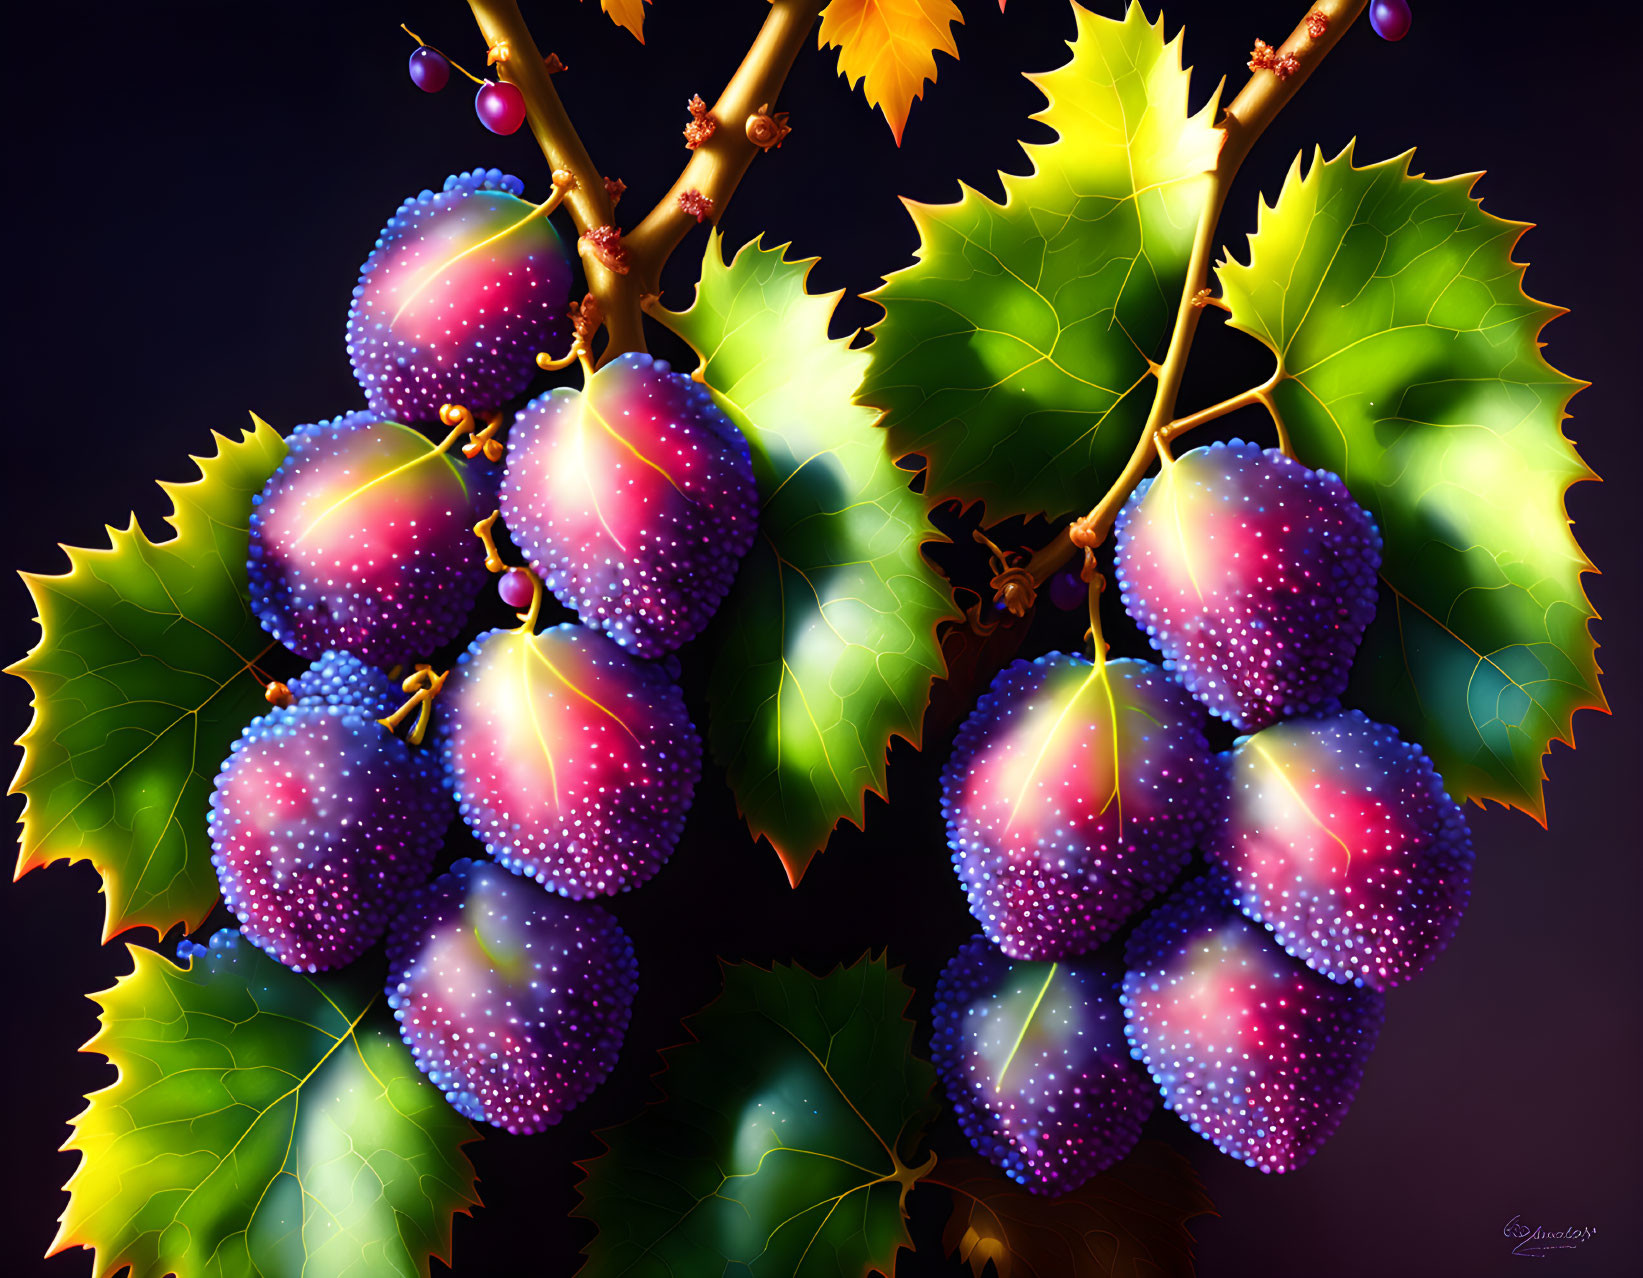 A cluster of grapes, 